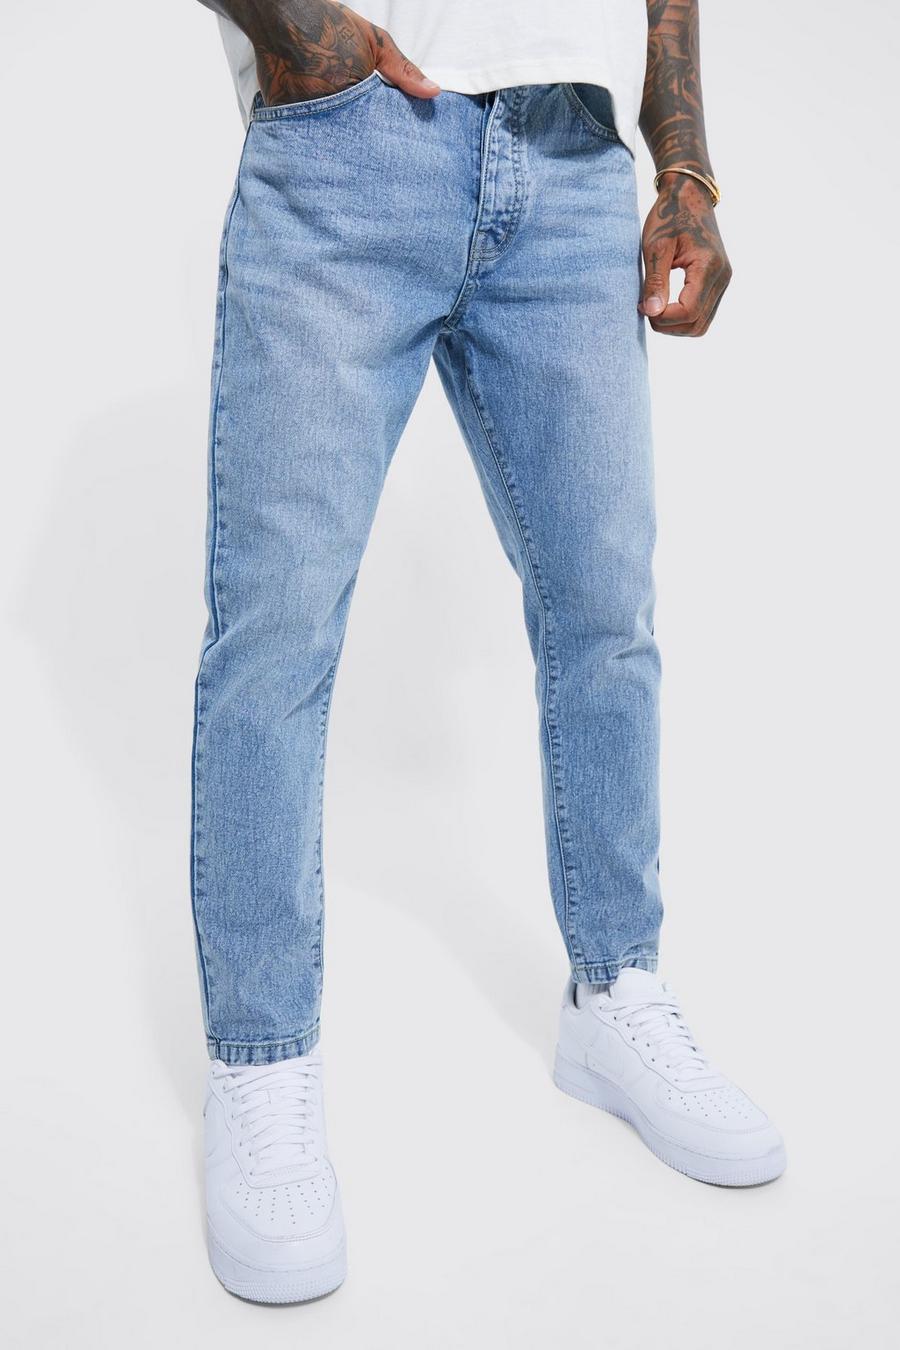 frokost temperament mental Tapered Fit Jeans | boohoo